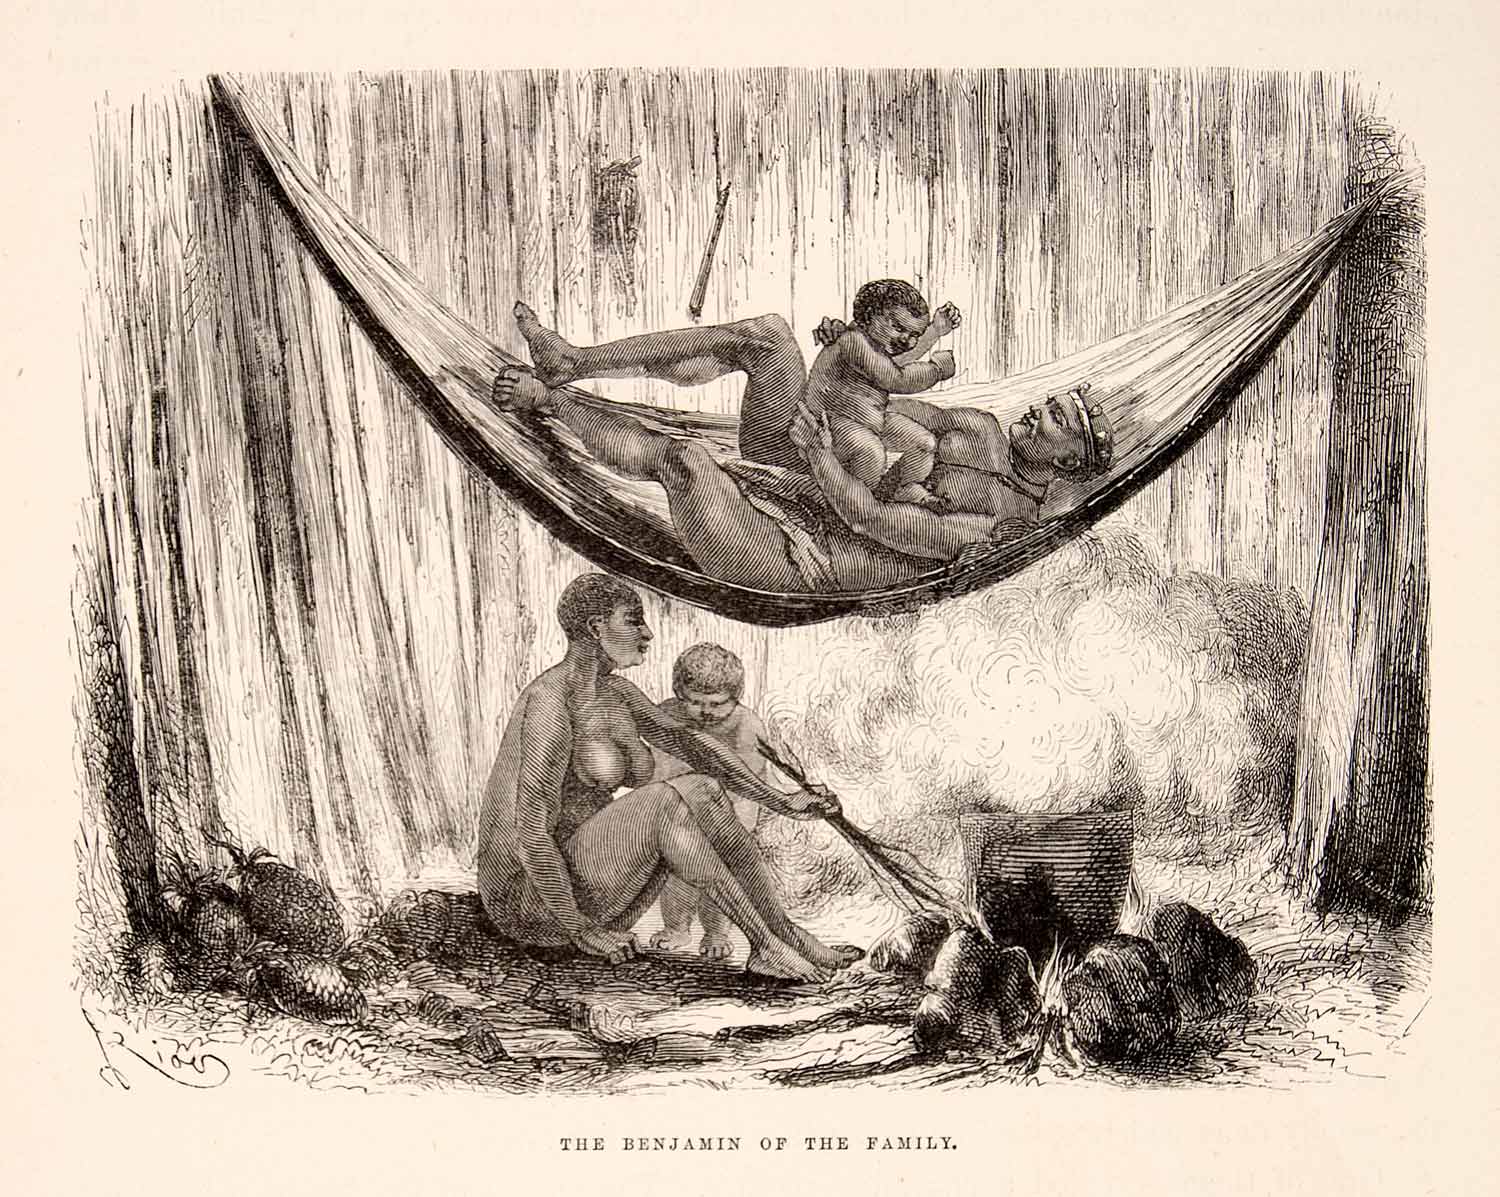 1875 Wood Engraving Yahua Indian Family Nude Hammock Home Interior XGHC1